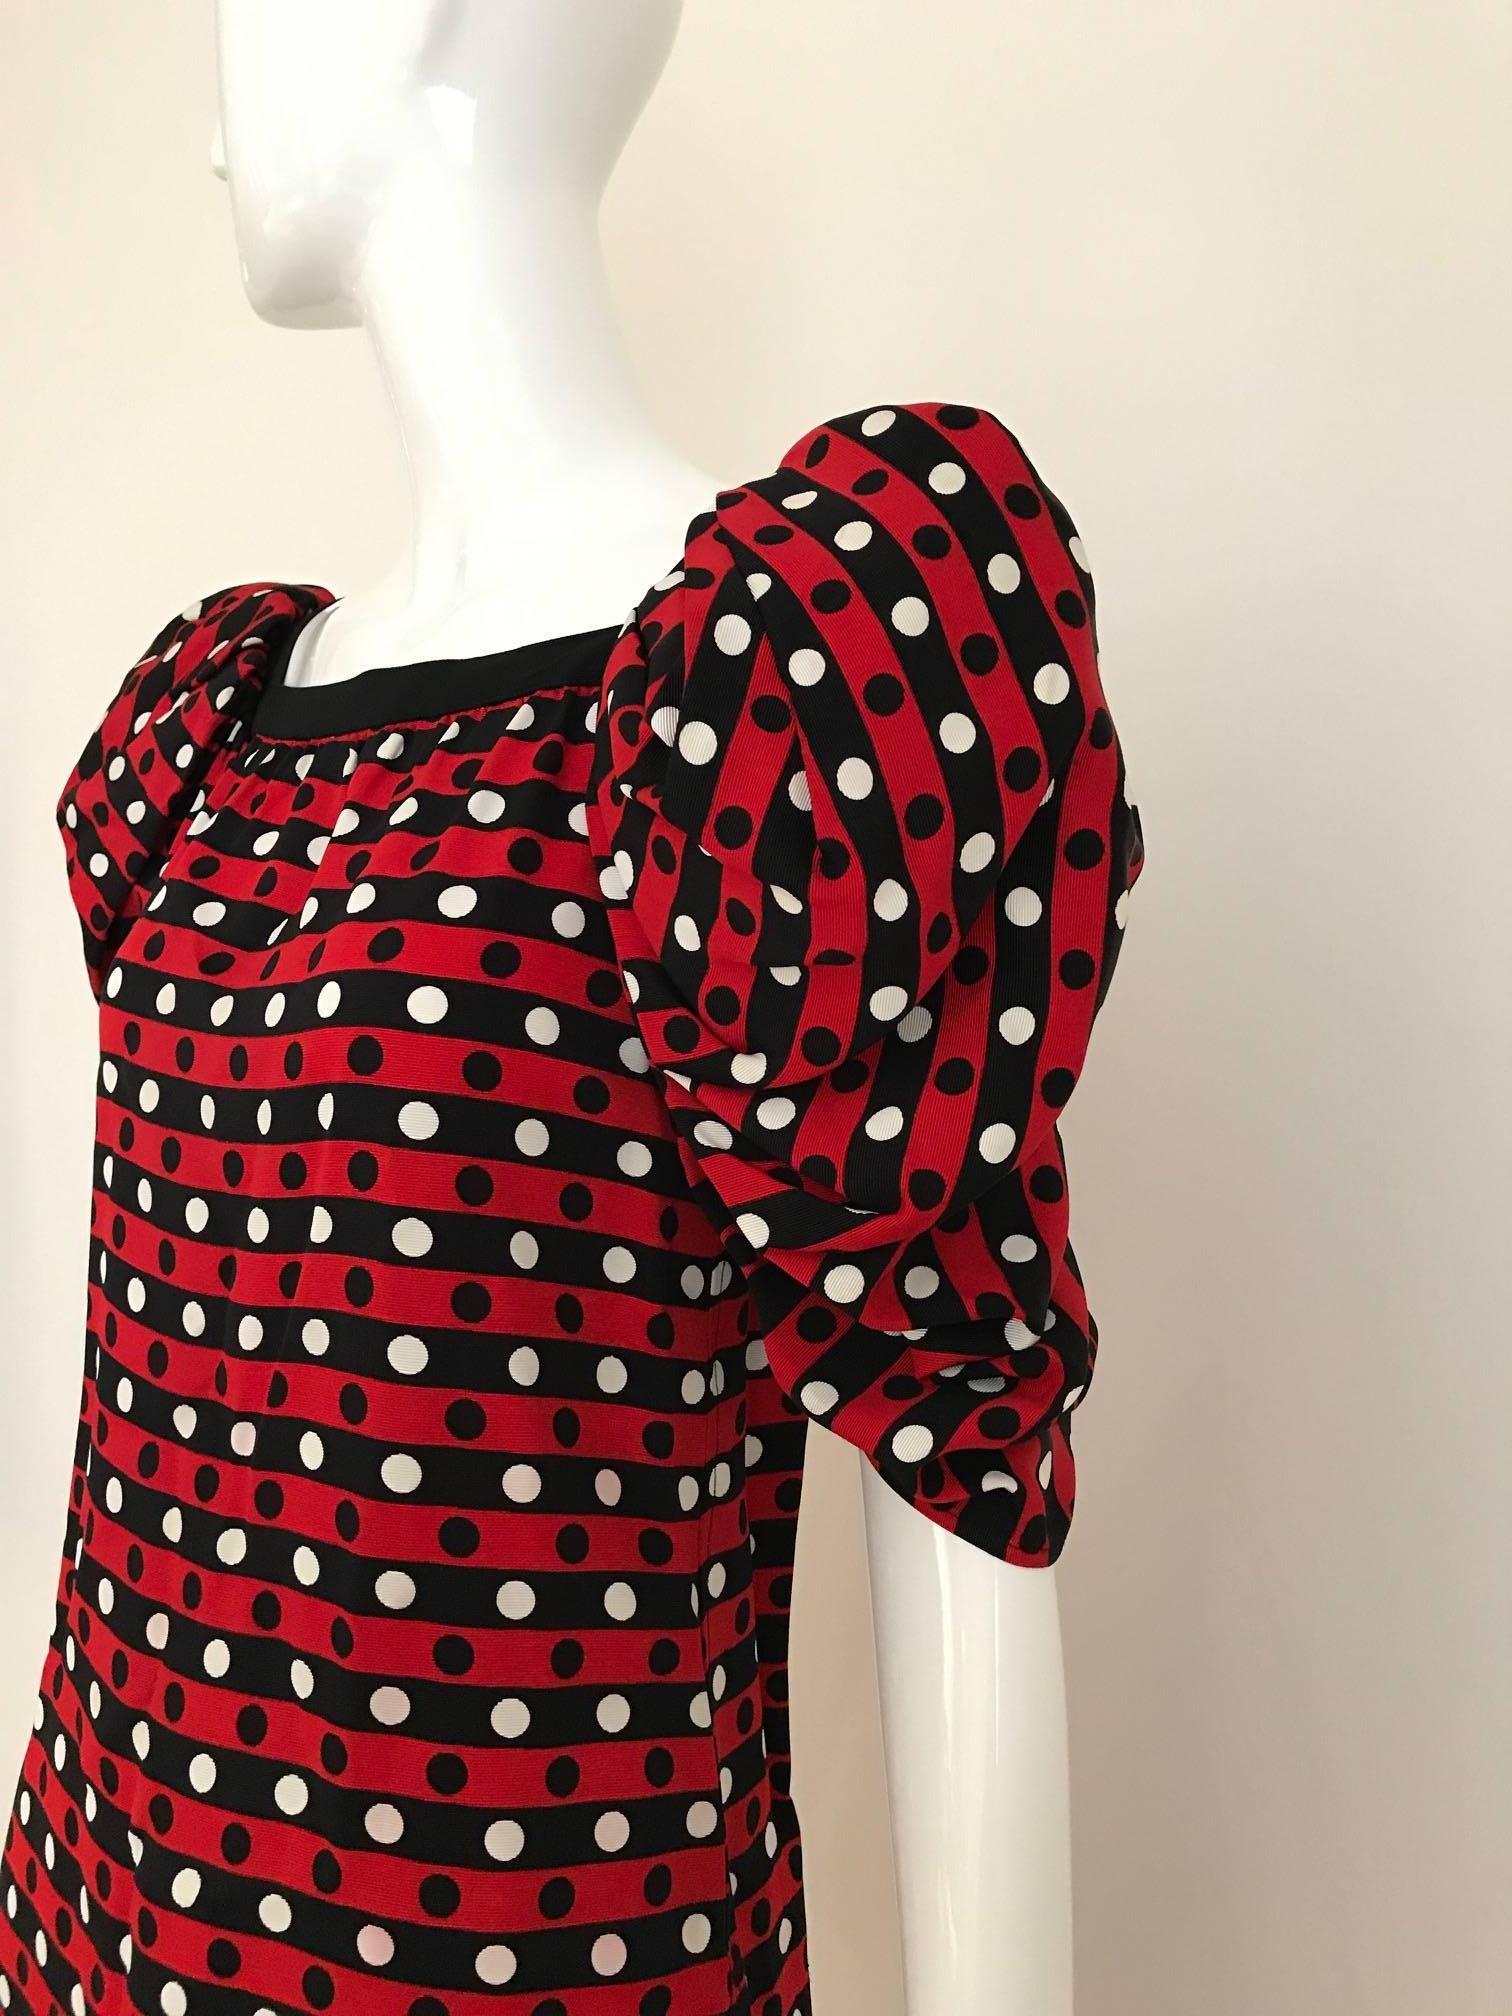 Vintage Saint Laurent red polkadot blouse and skirt ensemble In Excellent Condition For Sale In Beverly Hills, CA